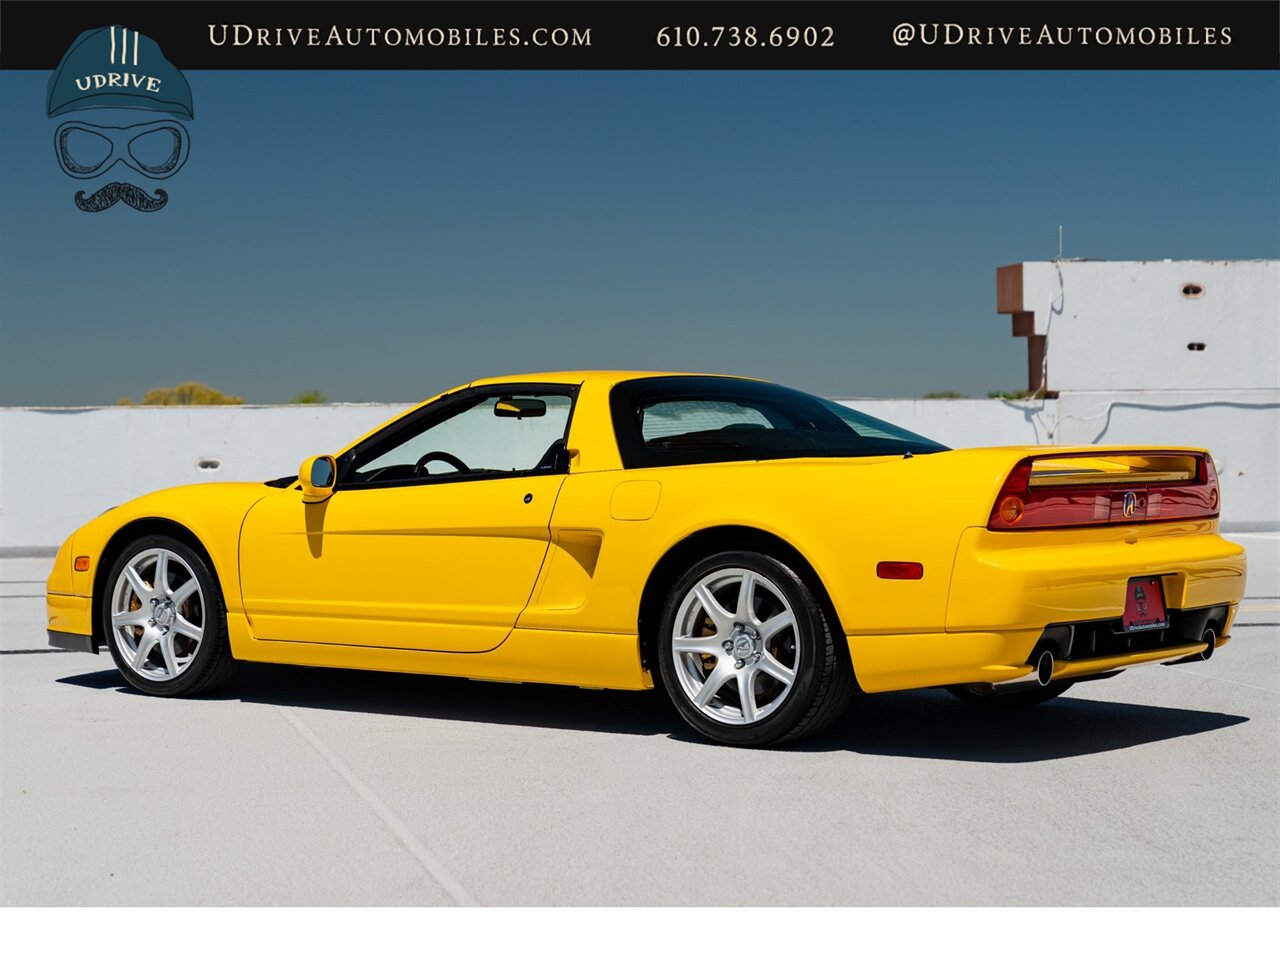 2003 Acura NSX NSX-T  Spa Yellow over Yellow Lthr 1 of 13 Produced - Photo 23 - West Chester, PA 19382